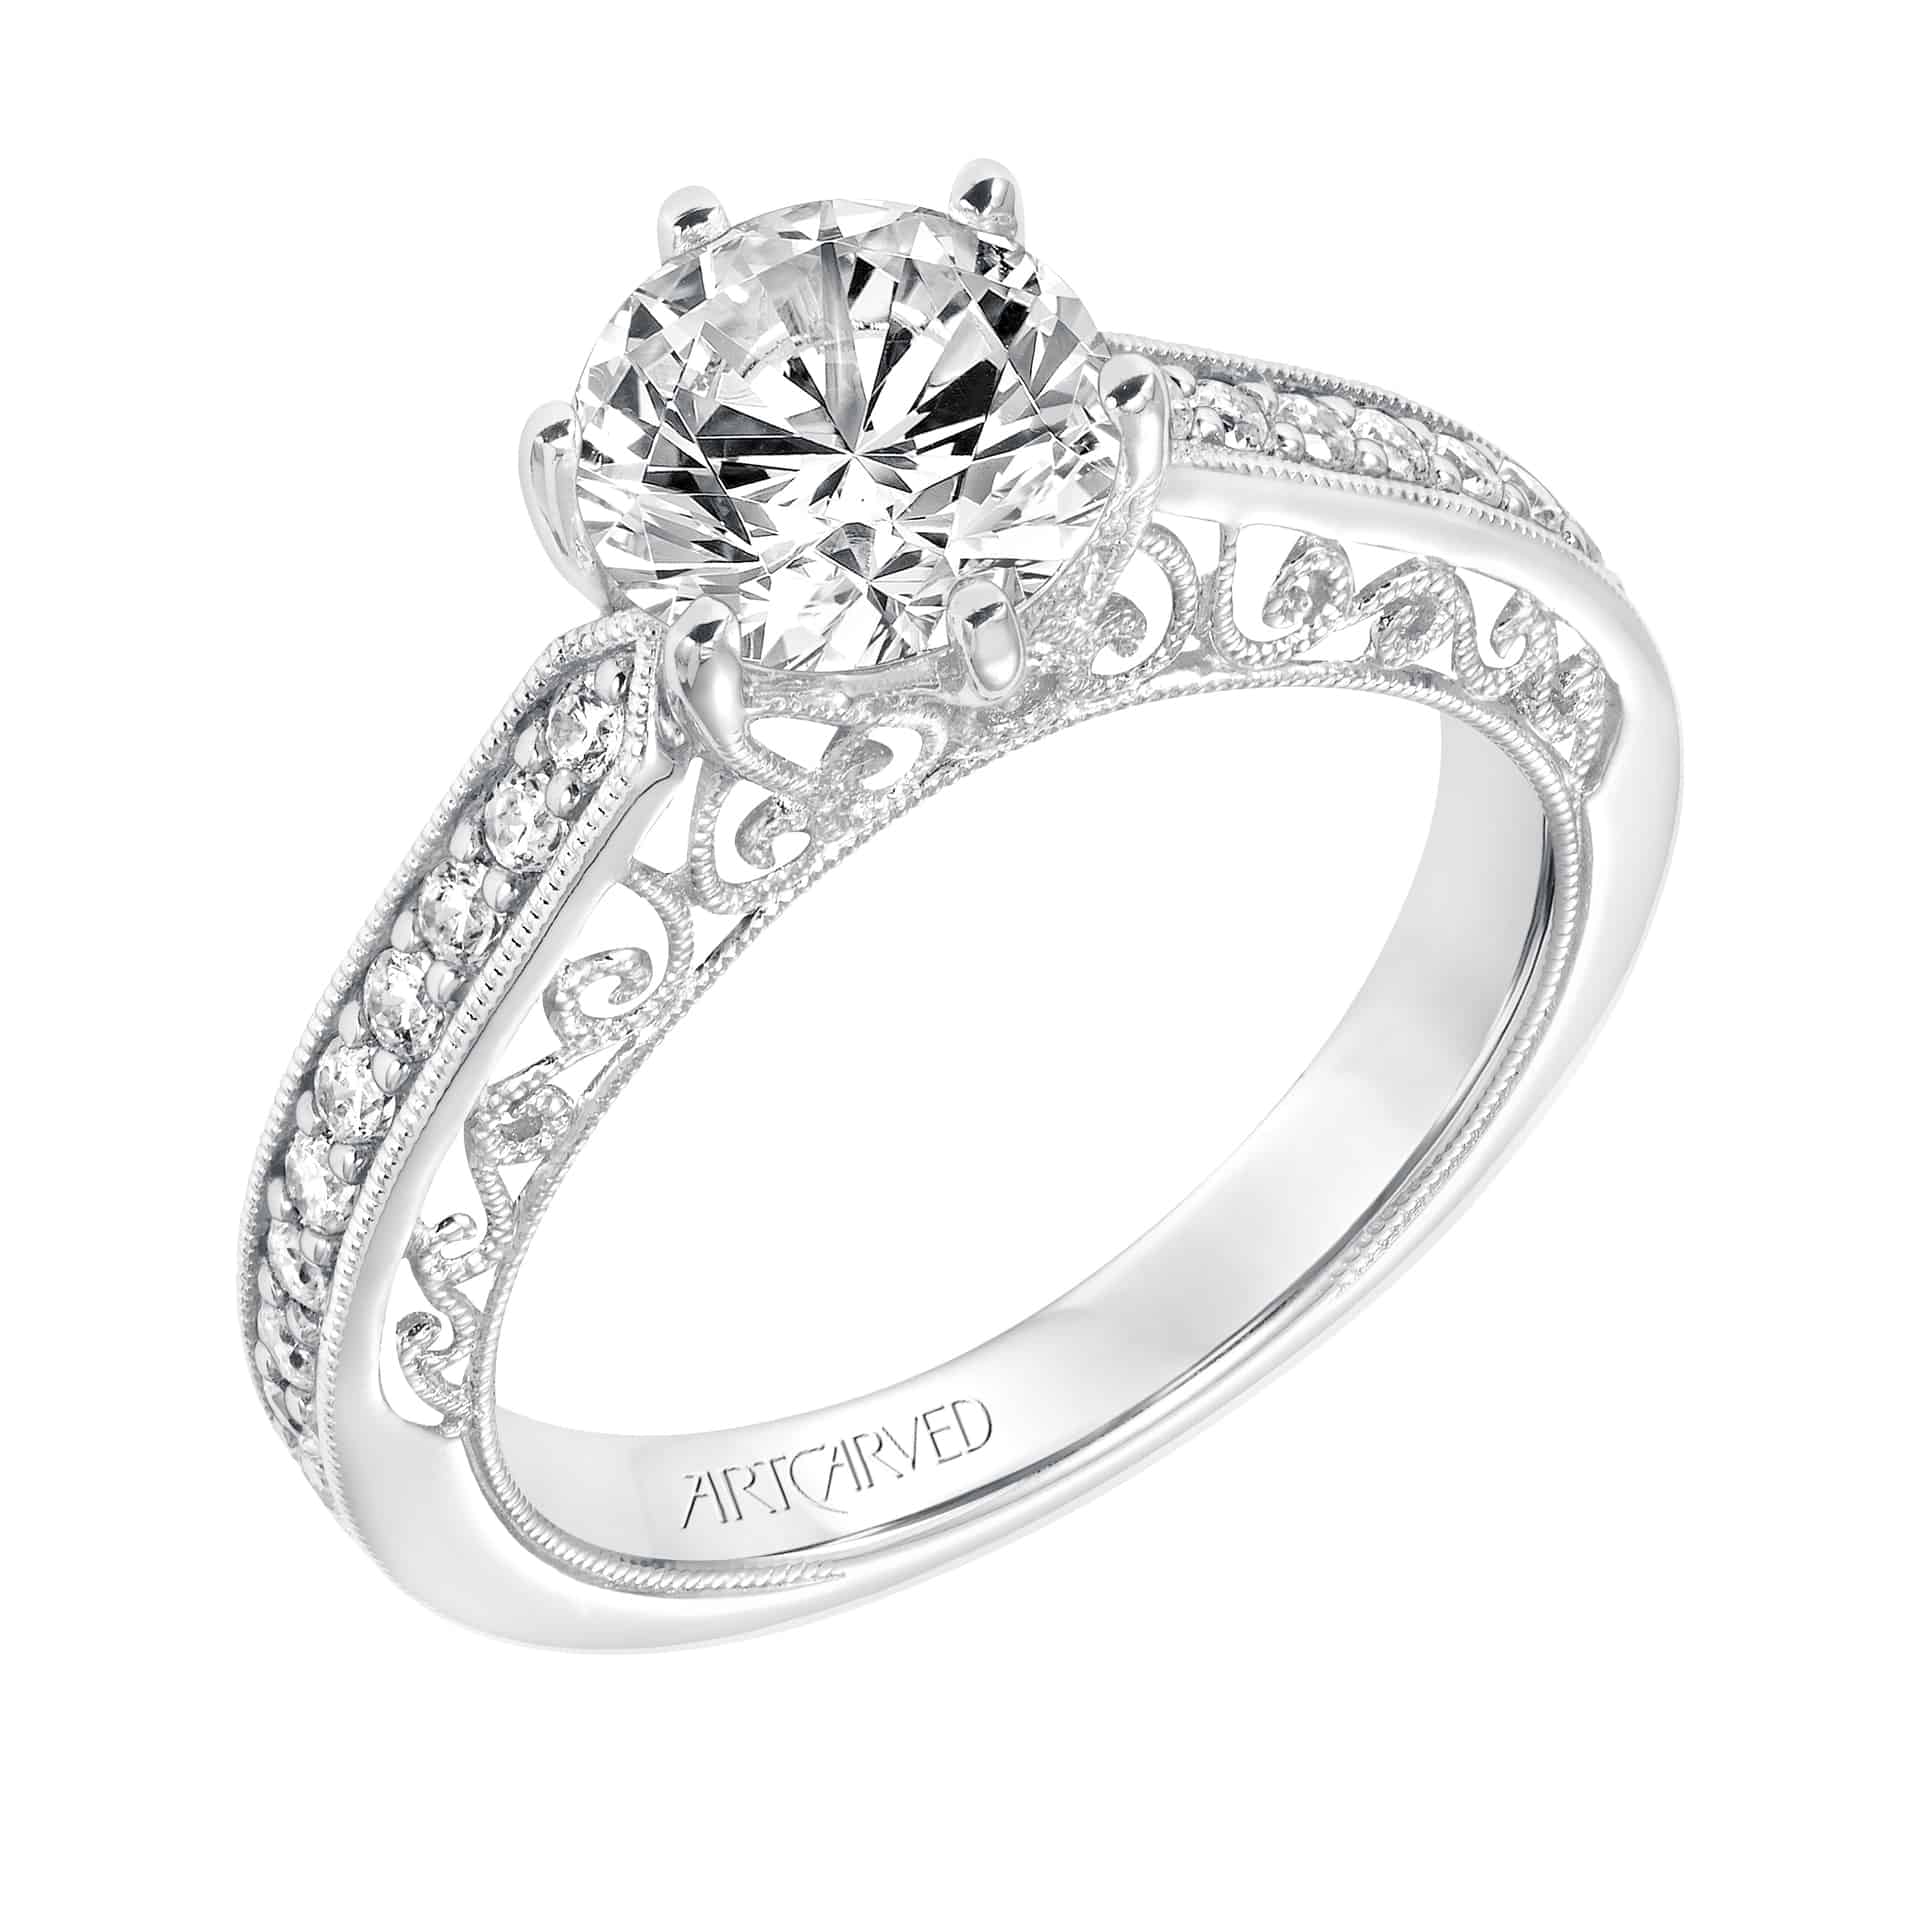 Unique Vintage Diamond Engagement Rings | With Clarity